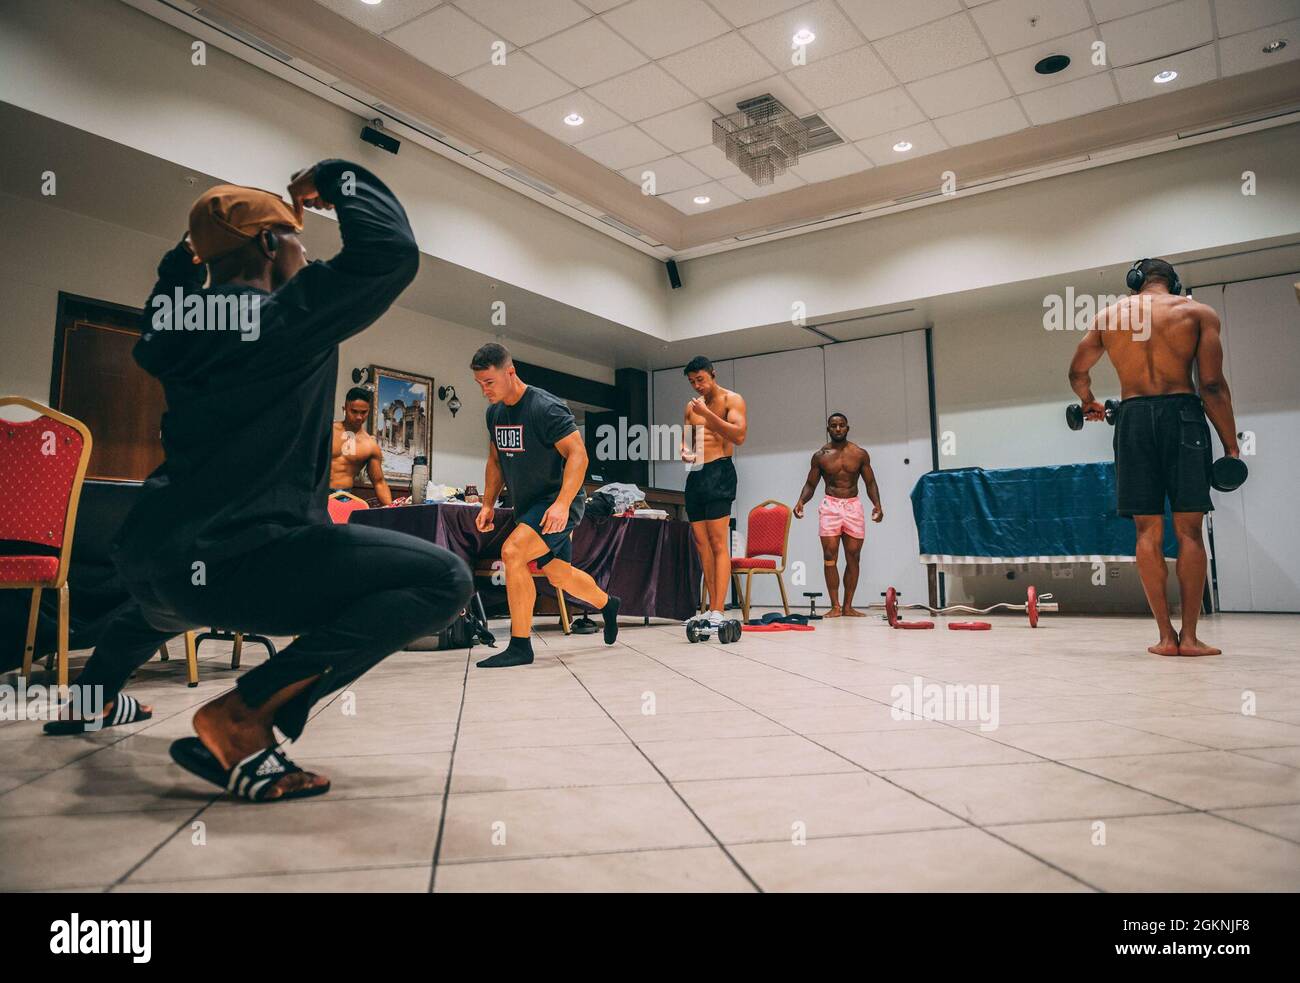 Airmen from the 39th Air Base Wing warm up back stage during the Clash of the Titans bodybuilding competition, June 6, 2021, at Incirlik Air Base, Turkey. Five male and female participants competed for first, second, and third place titles in the bikini, classic and physique divisions. Stock Photo